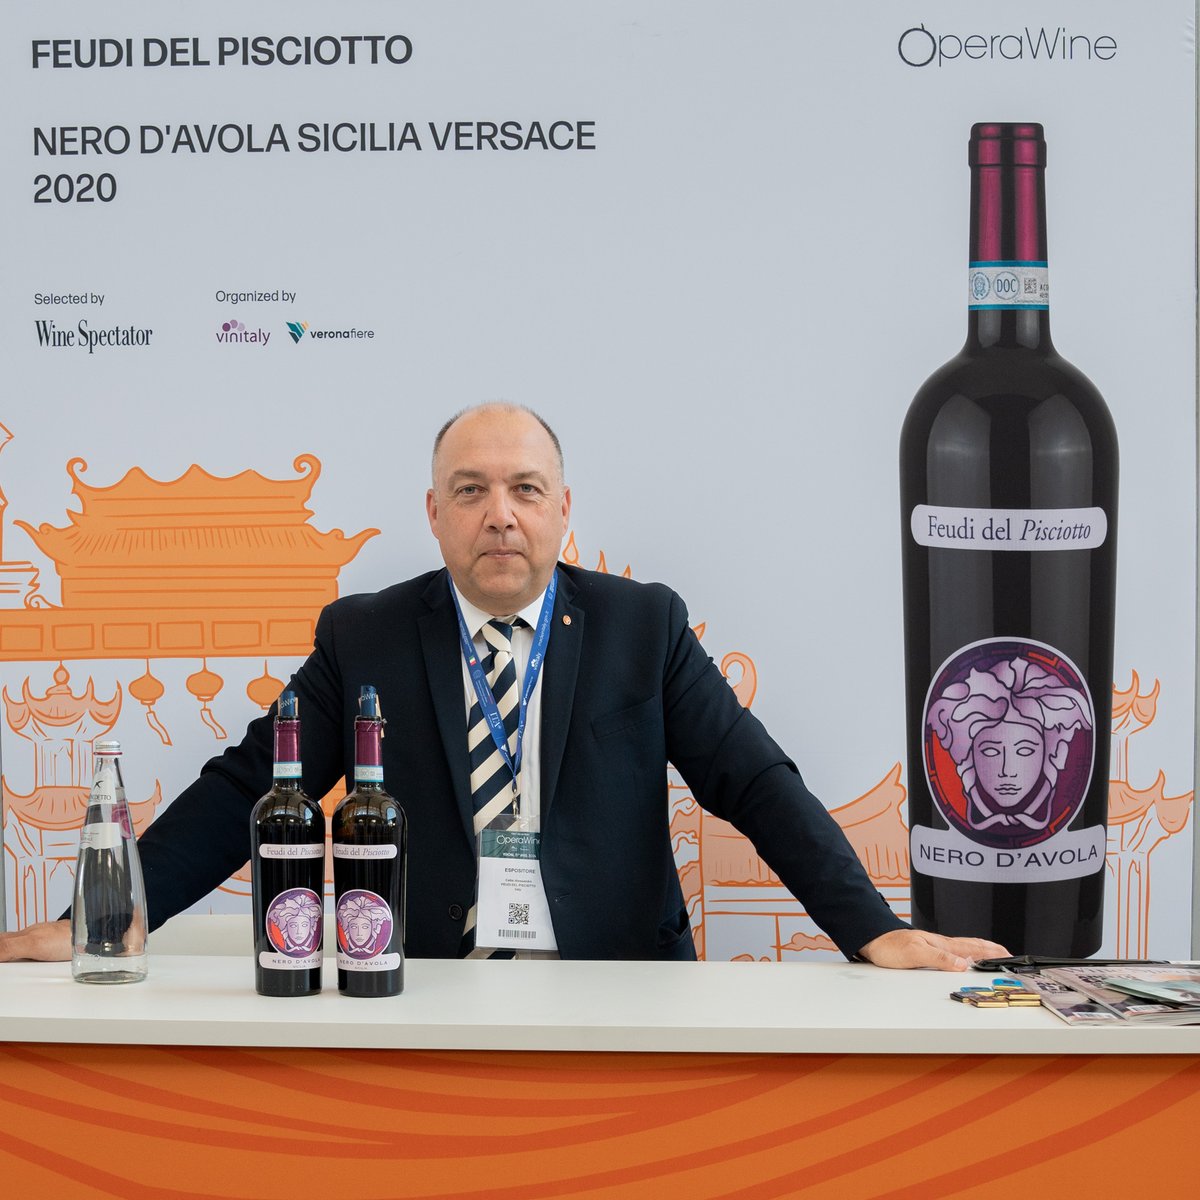 Here is the portrait of @CastellareWine, one of the great Italian producers selected by Wine Spectator for #OperaWine2024. During this year's Grand Tasting, they shared with guests their Nero d'Avola Sicilia Versace 2020. Congratulations! #Vinitaly2024 #finestitalianwines